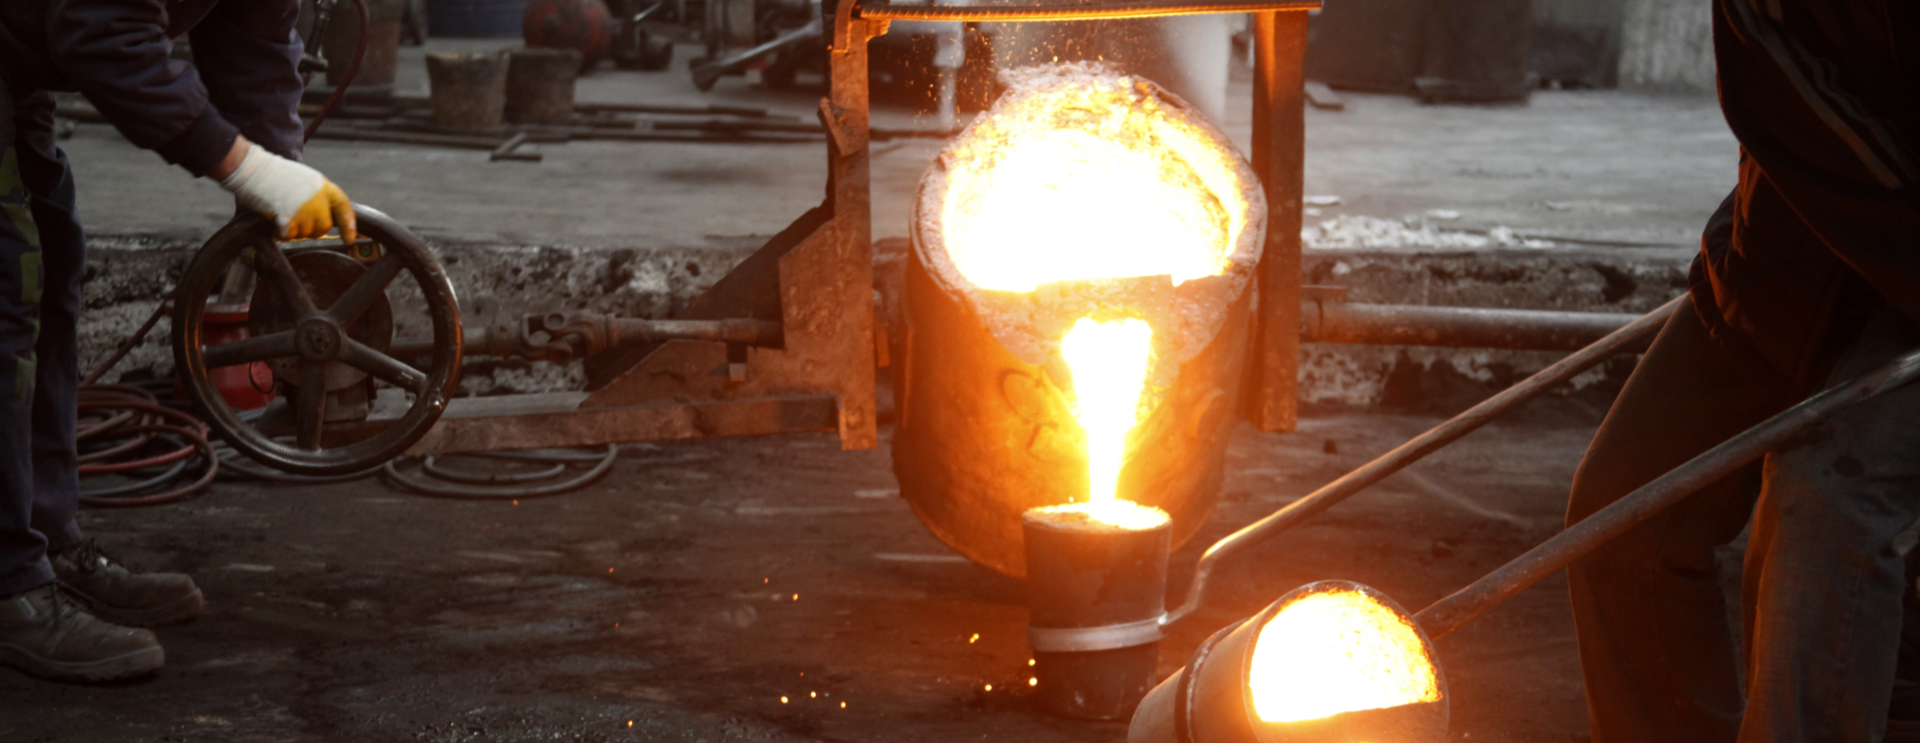 image of molten metal being poured